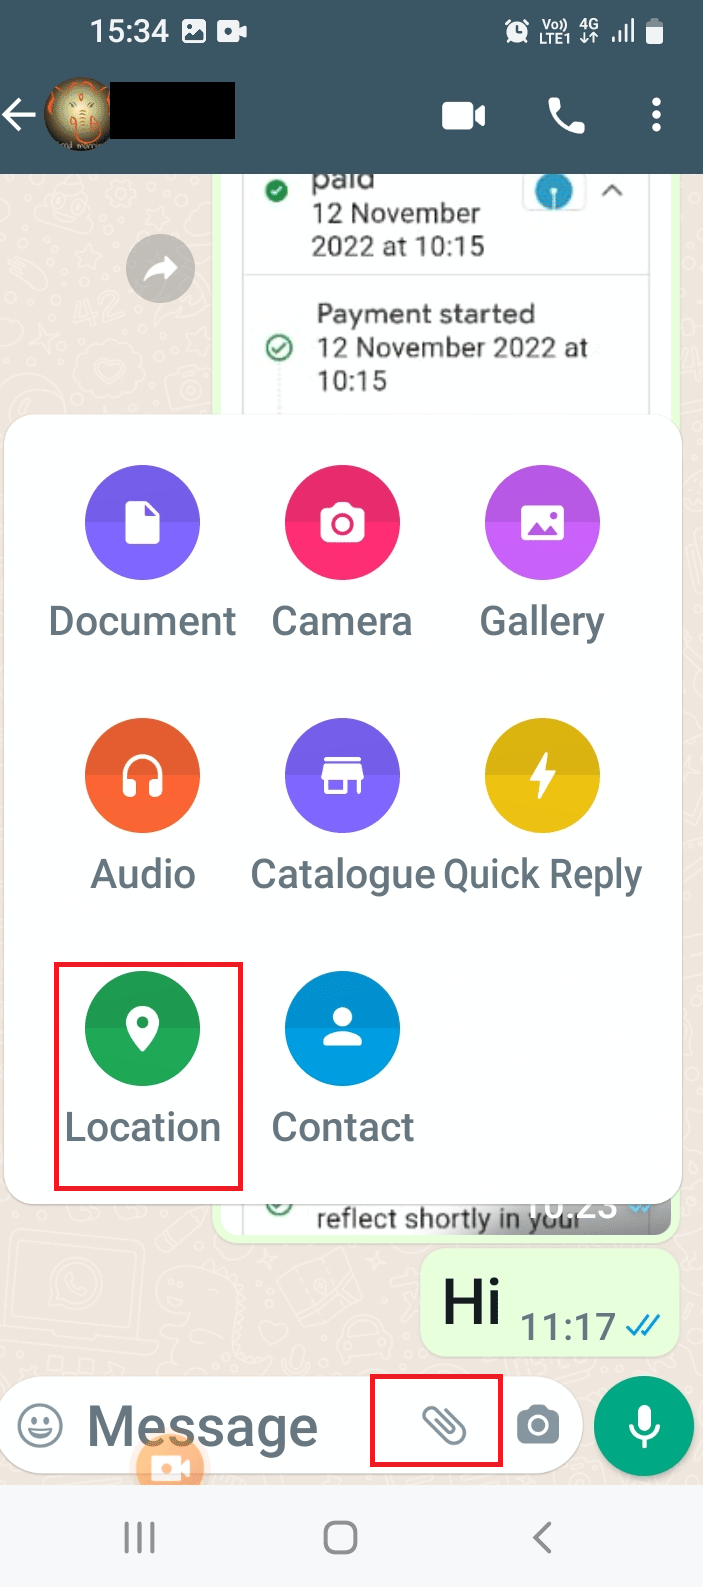 Tap on the Location option